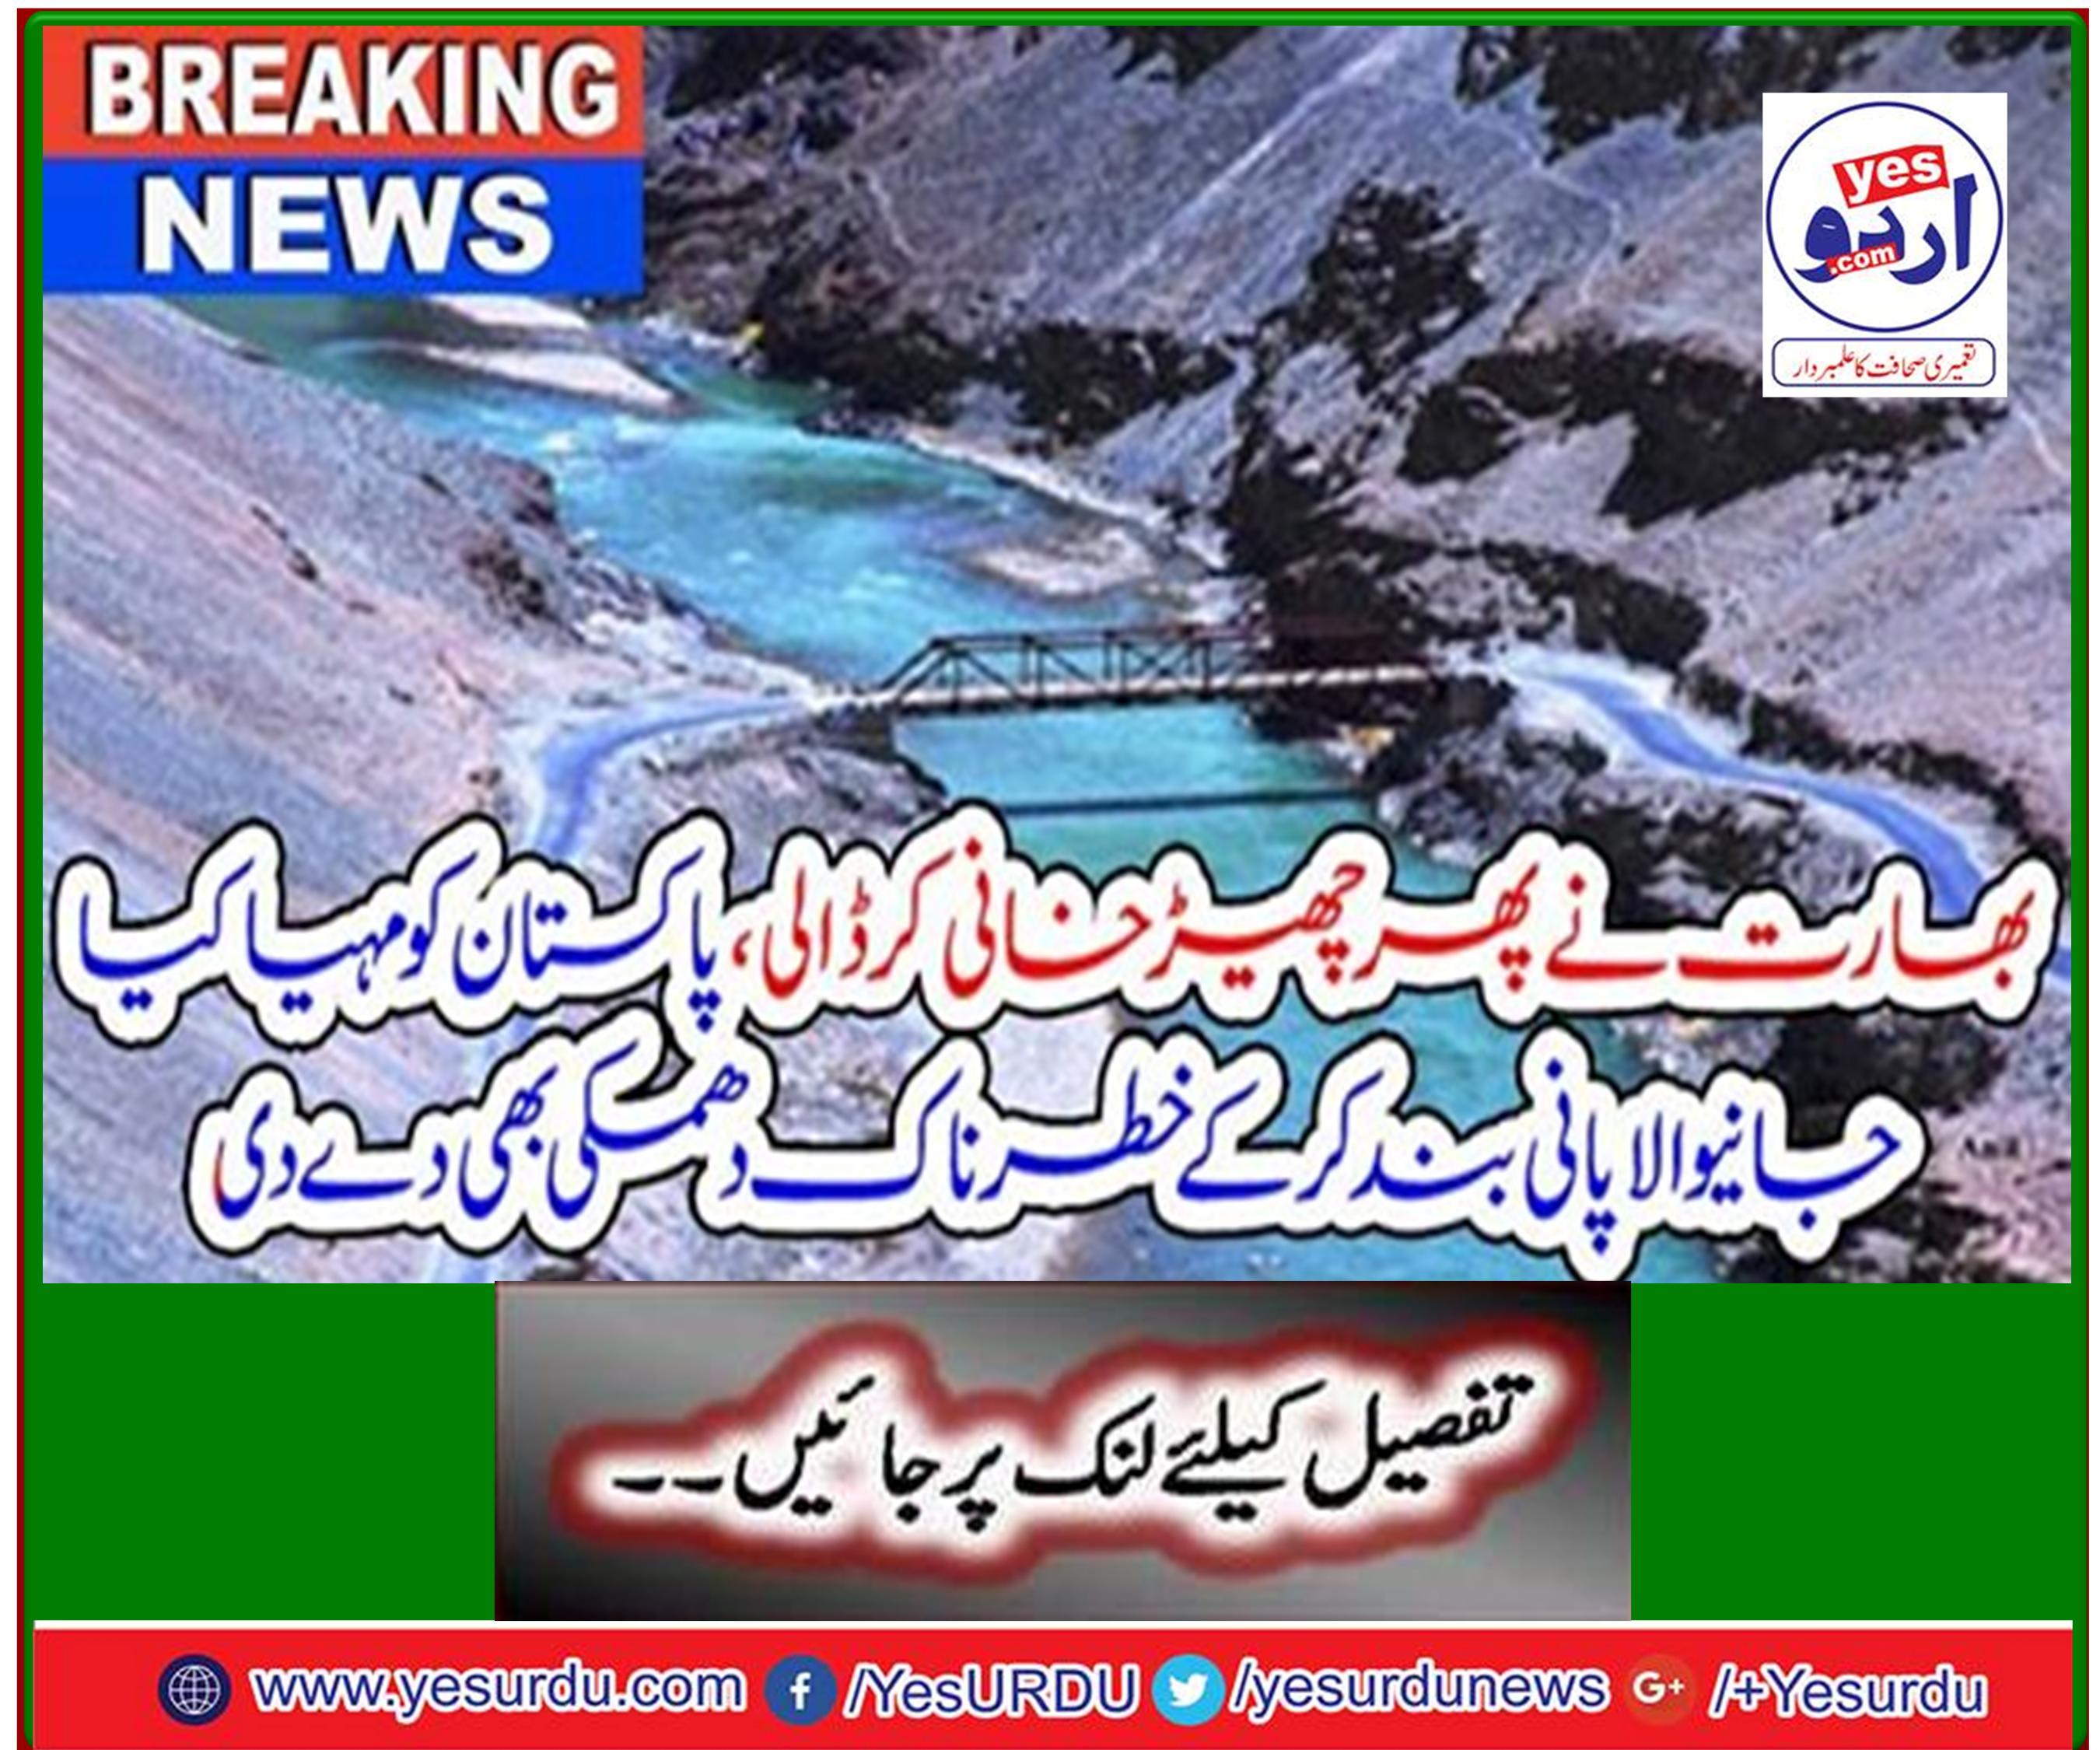 Breaking News: India again teased, threatened to stop water supplied to Pakistan